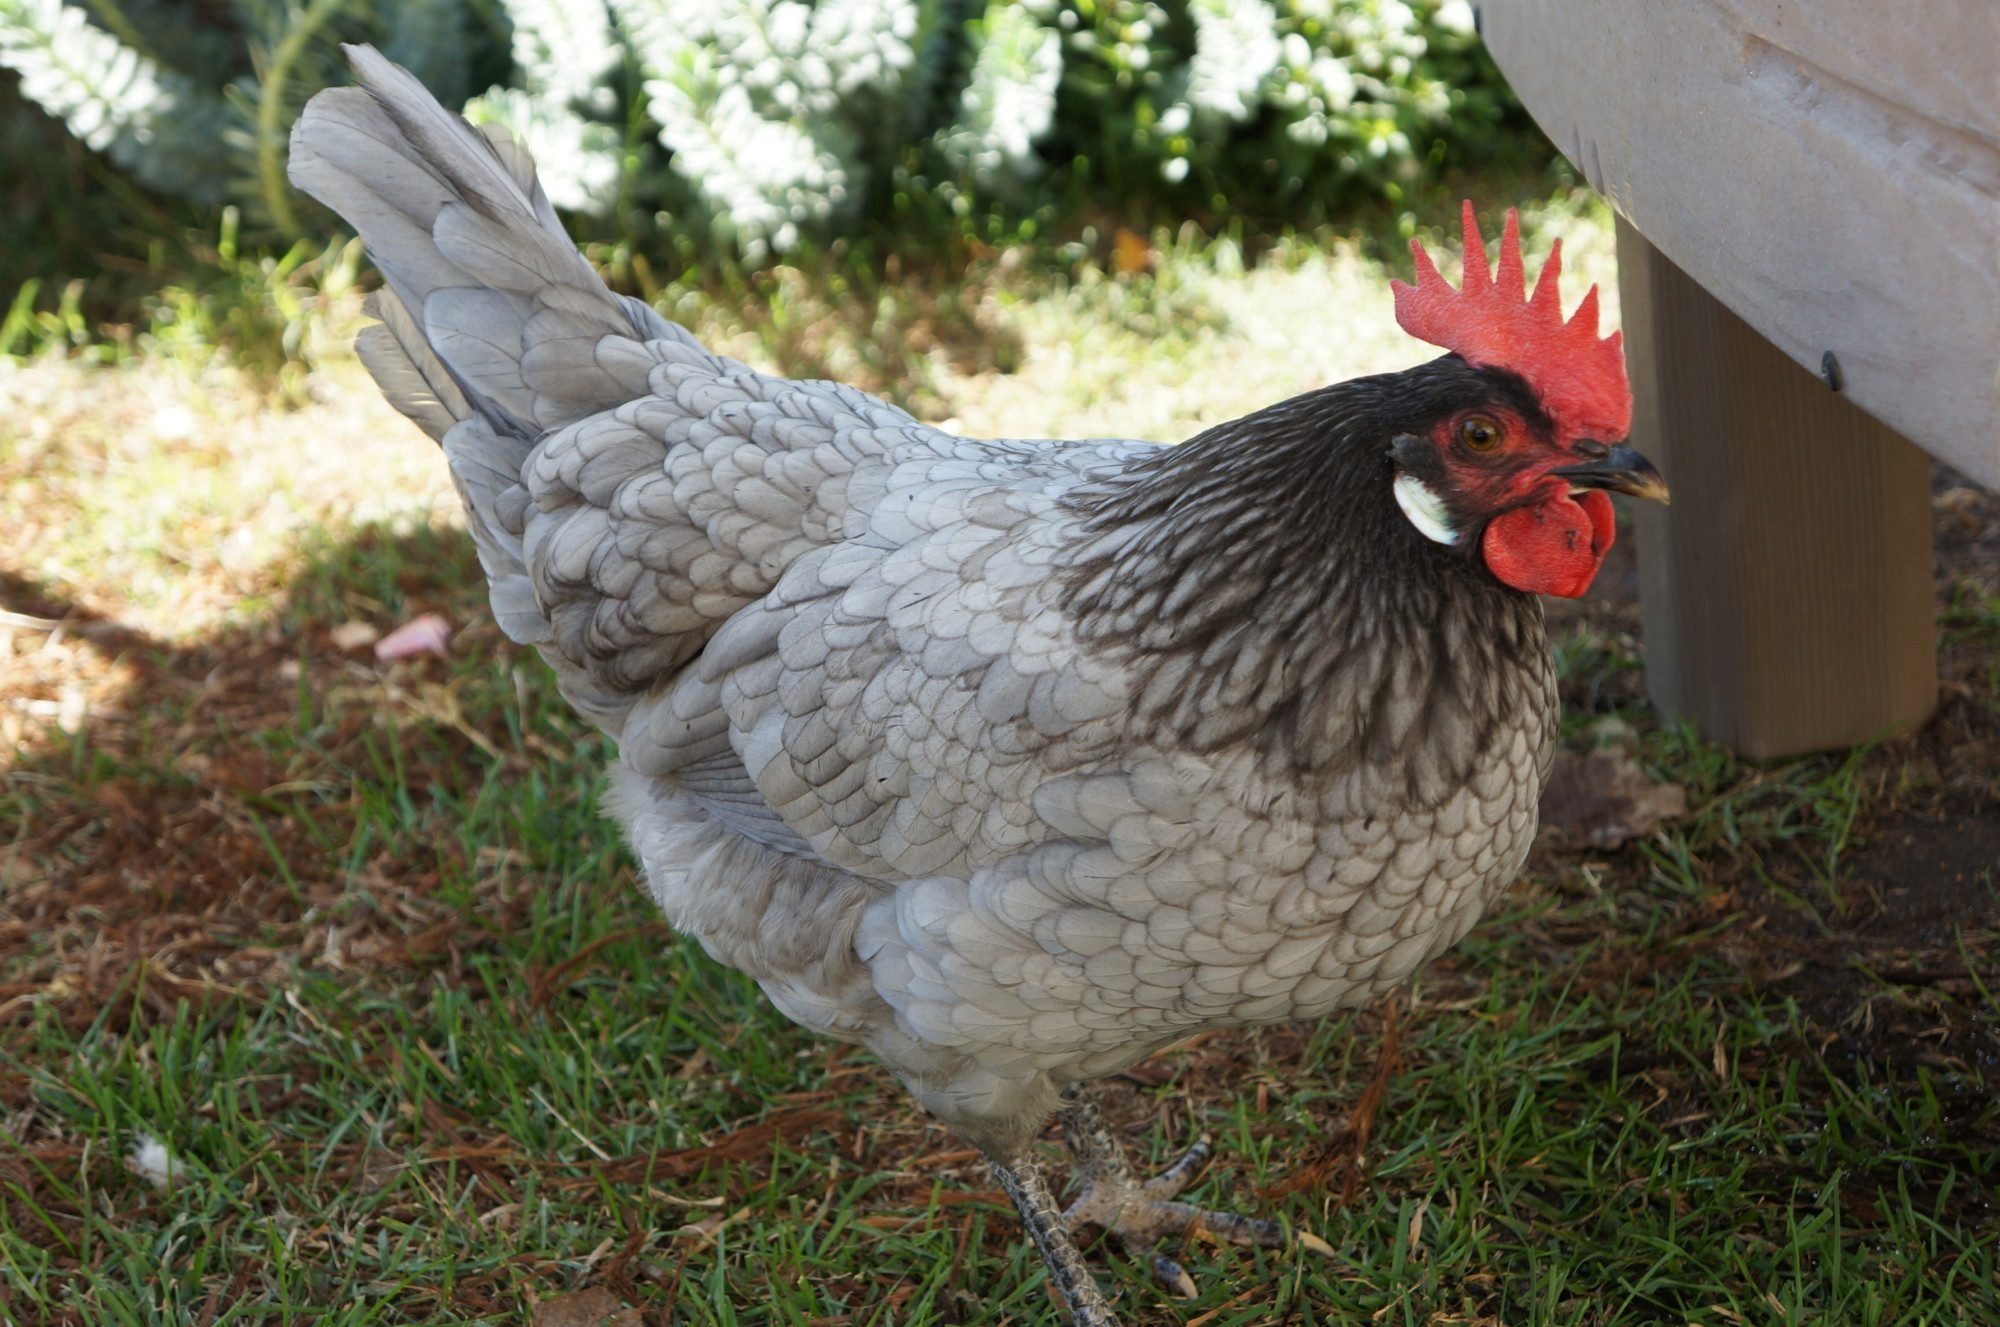 Andalusian Chicken Facts: Eggs, Breeds, Traits, Care, Habitat, More, stars of Mediterranean variety developed and took the name Andalusia.